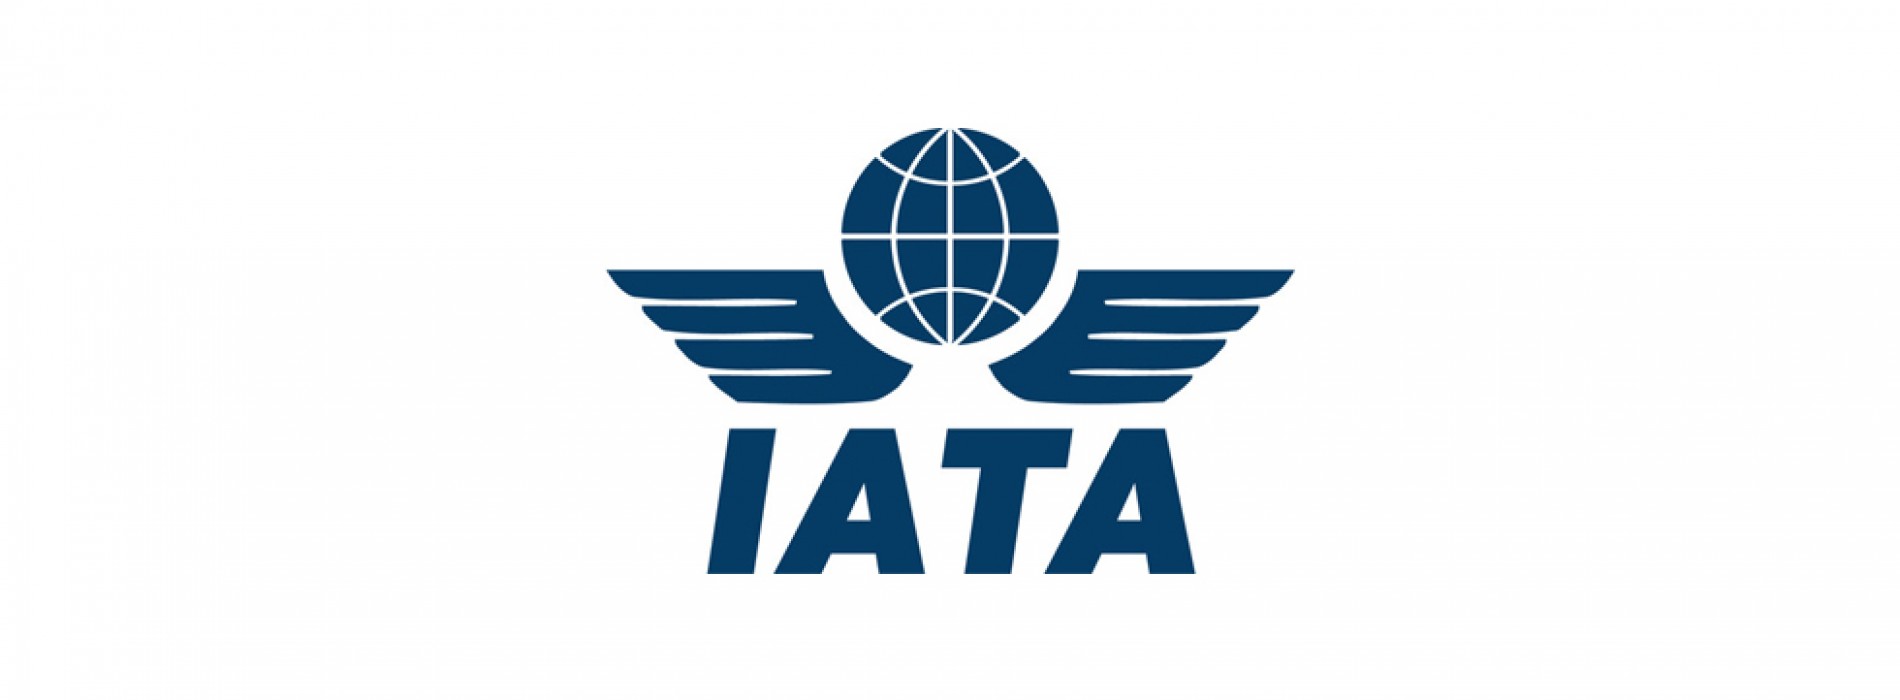 Indian aviation outlook very good but infra worrisome says IATA